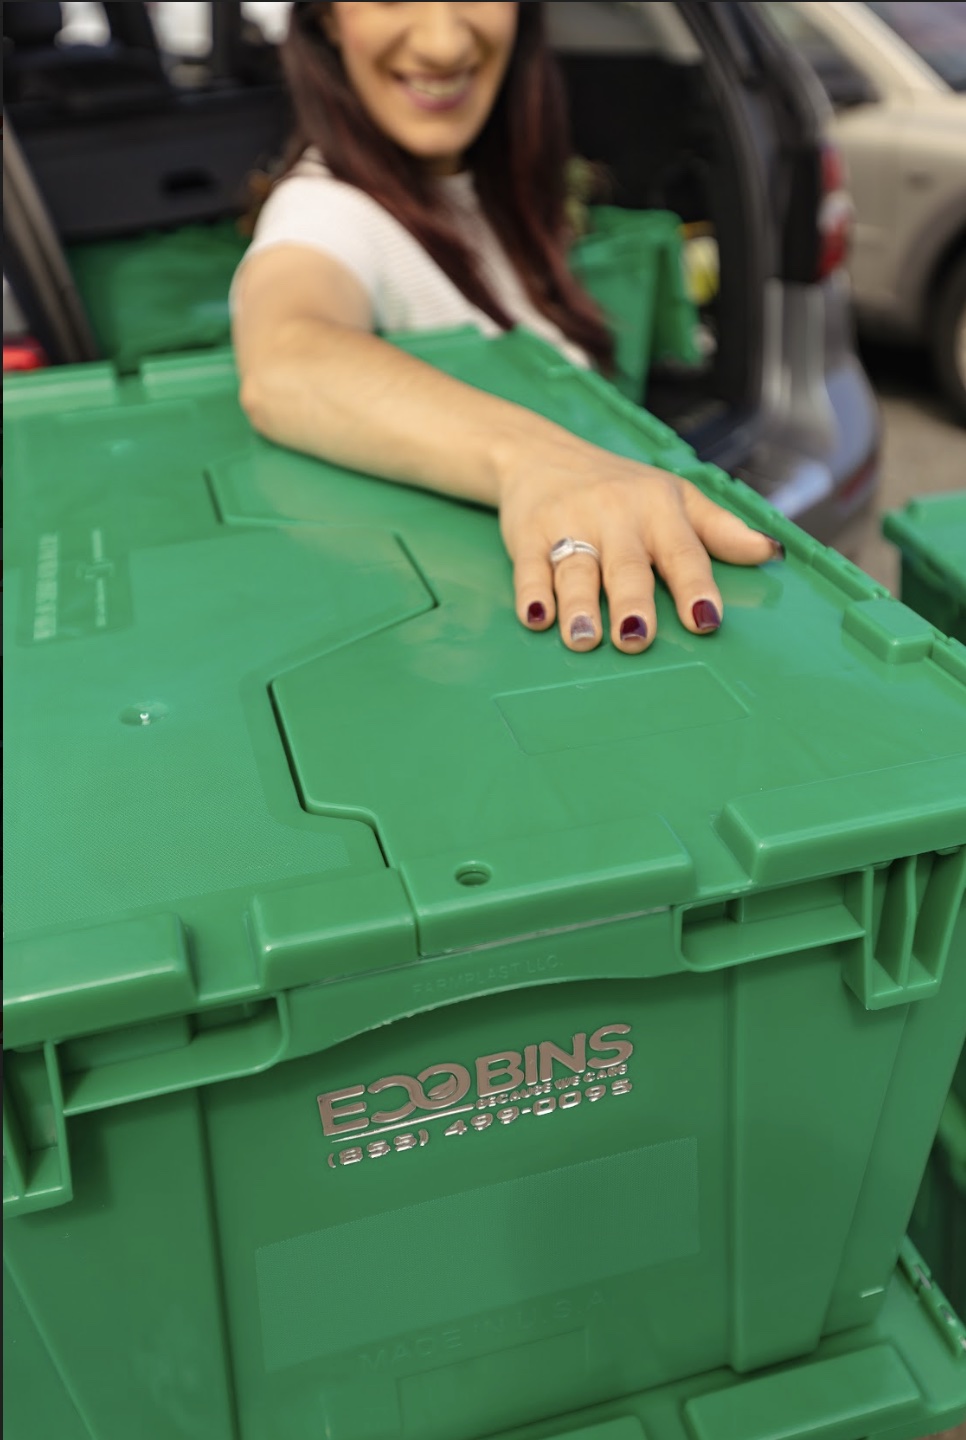 Commercial Moving Kits - Green Bin